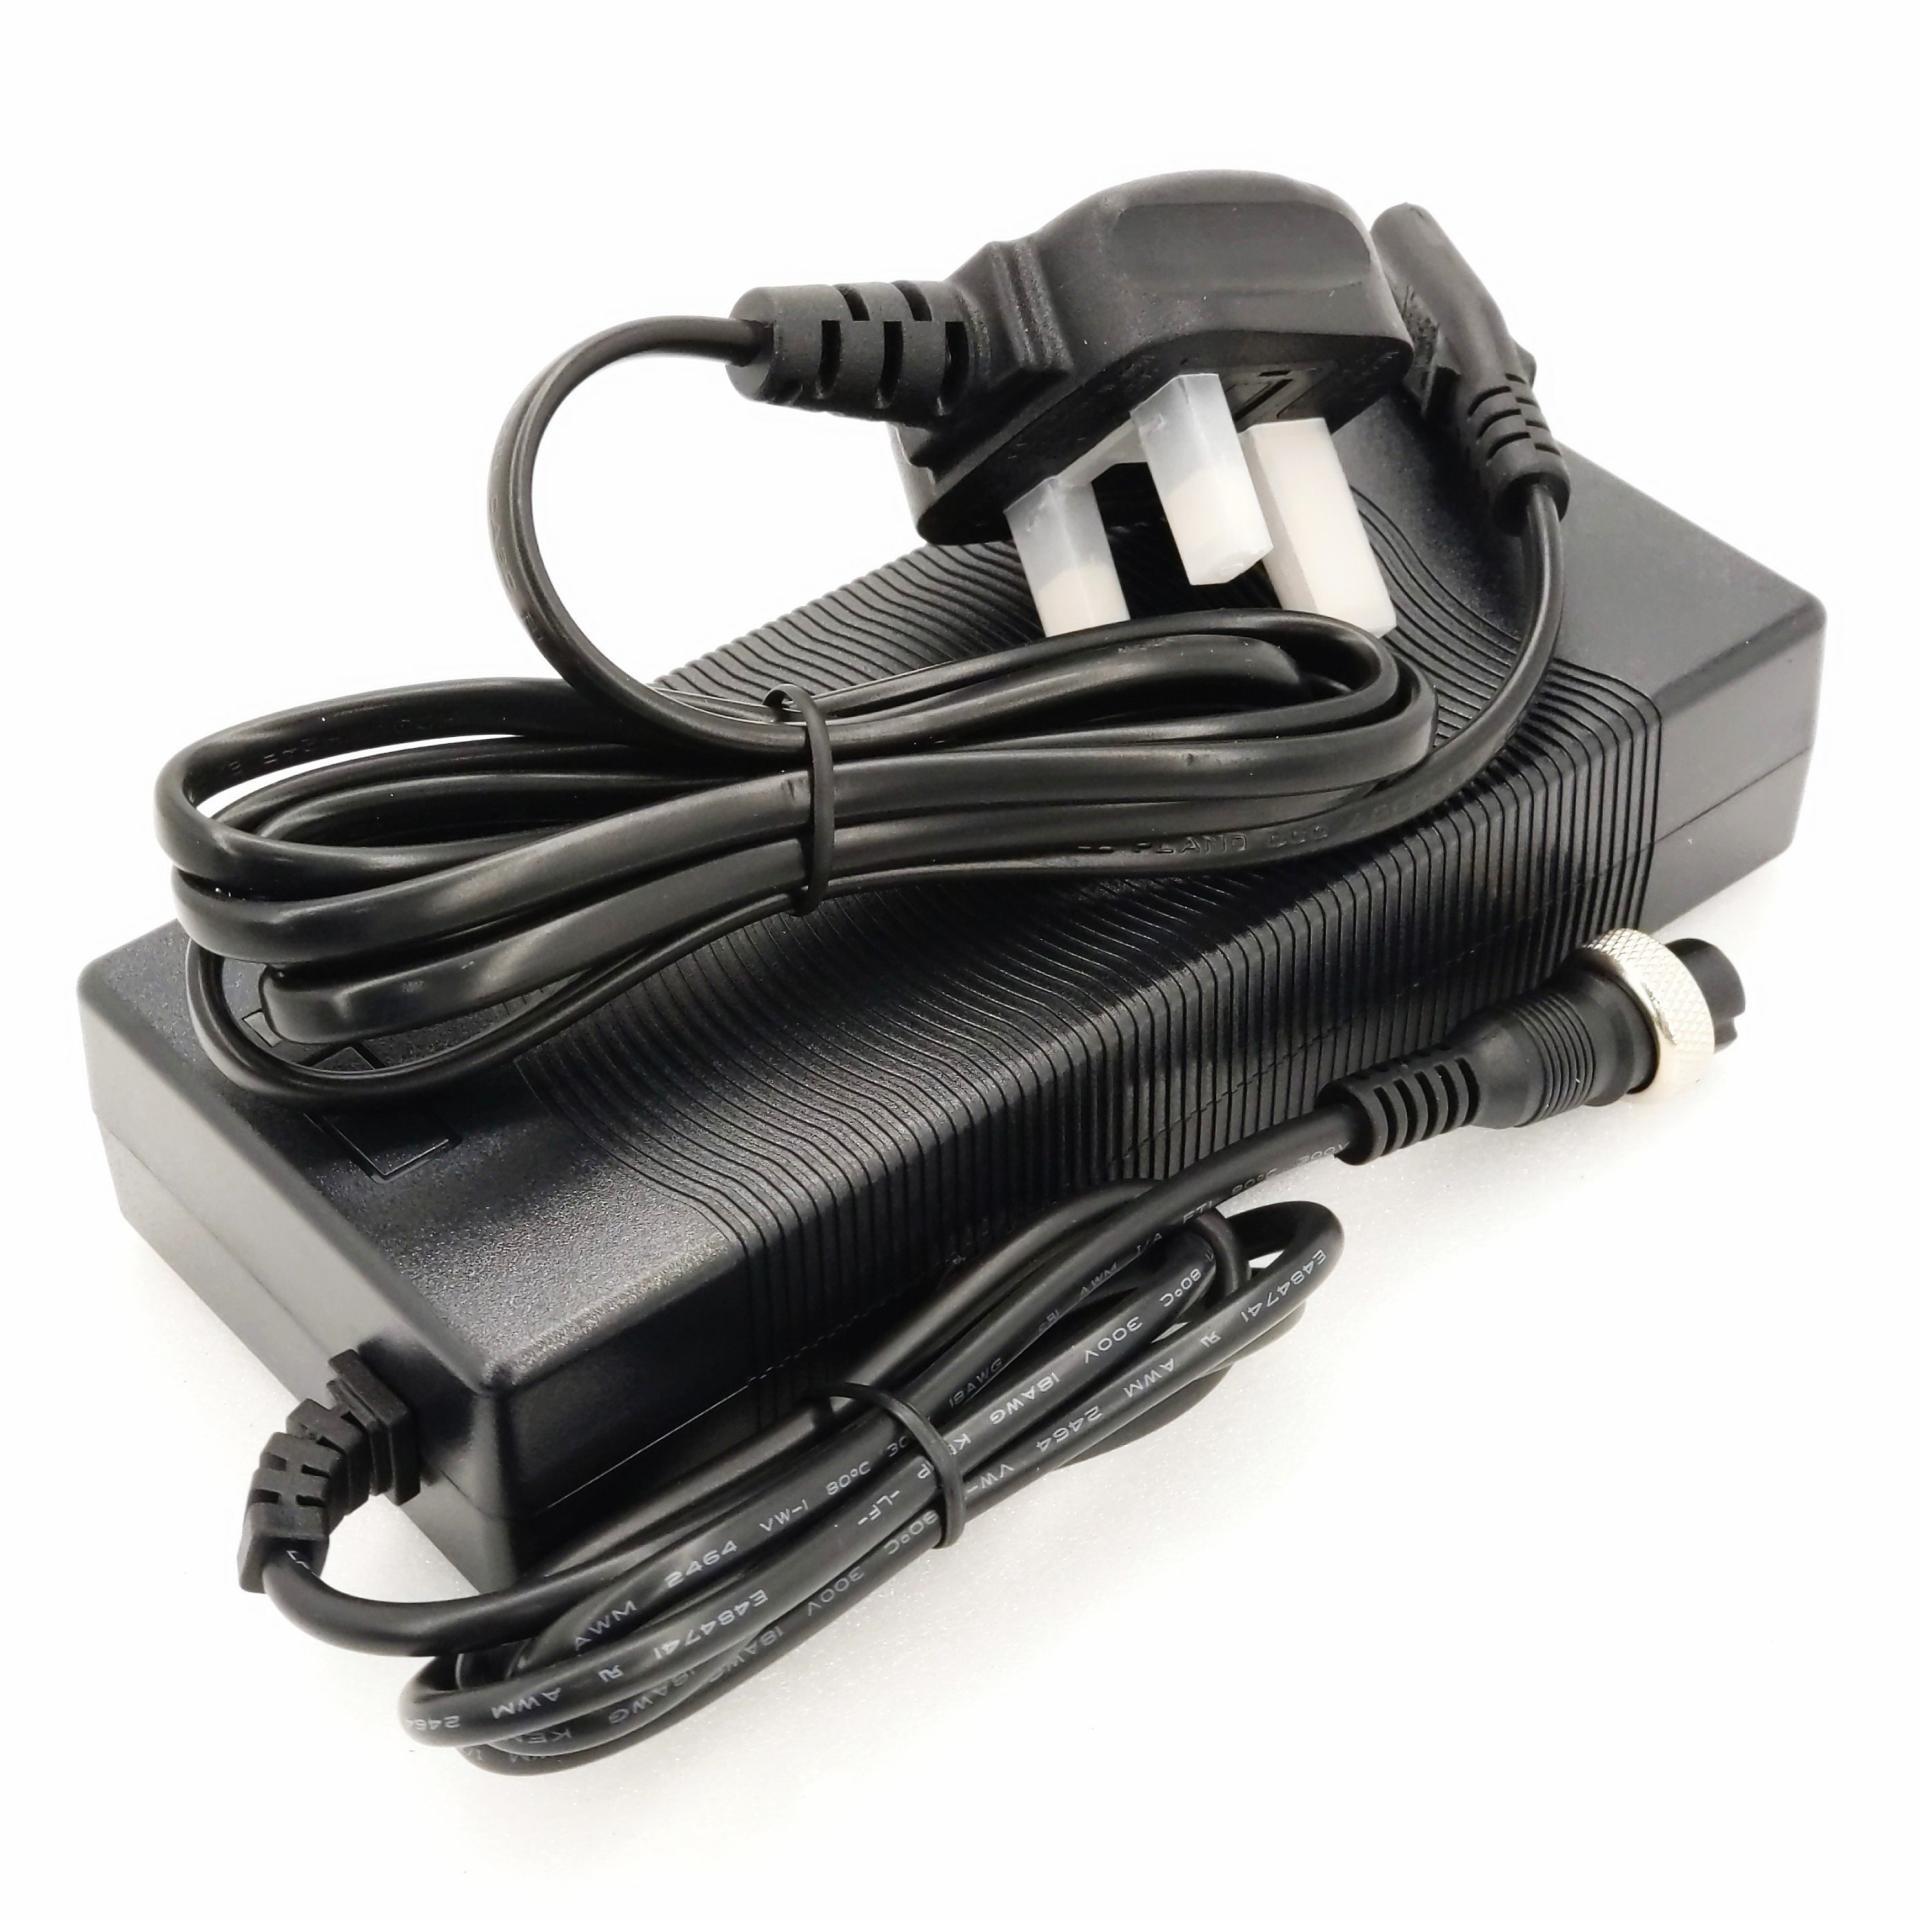 60V 1.75A Slow Charger for Dualtron X, 66.4V Max, 2 Pin